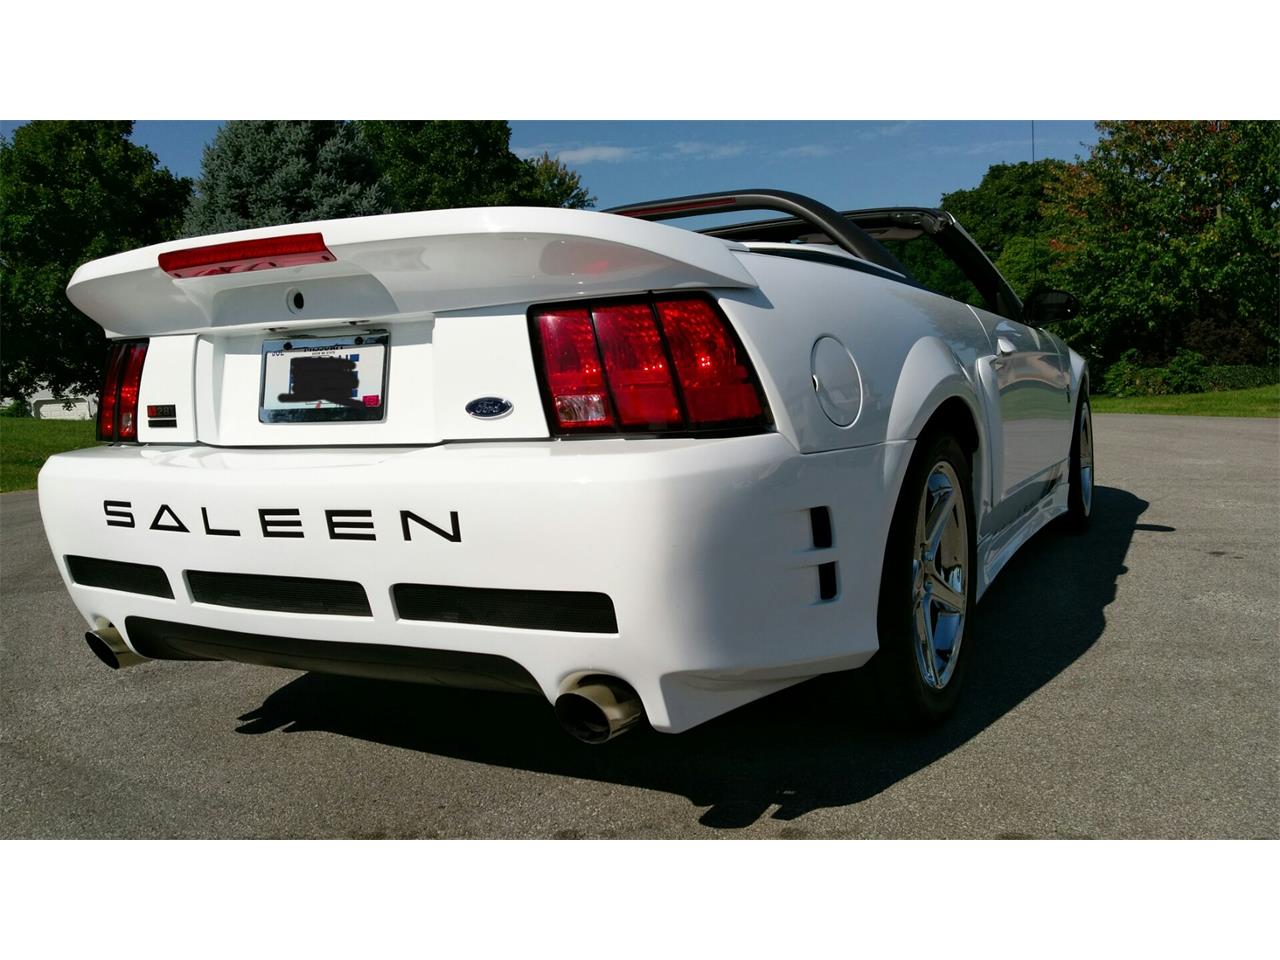 2000 Ford Mustang (Saleen) for sale in Parkville, MO – photo 4